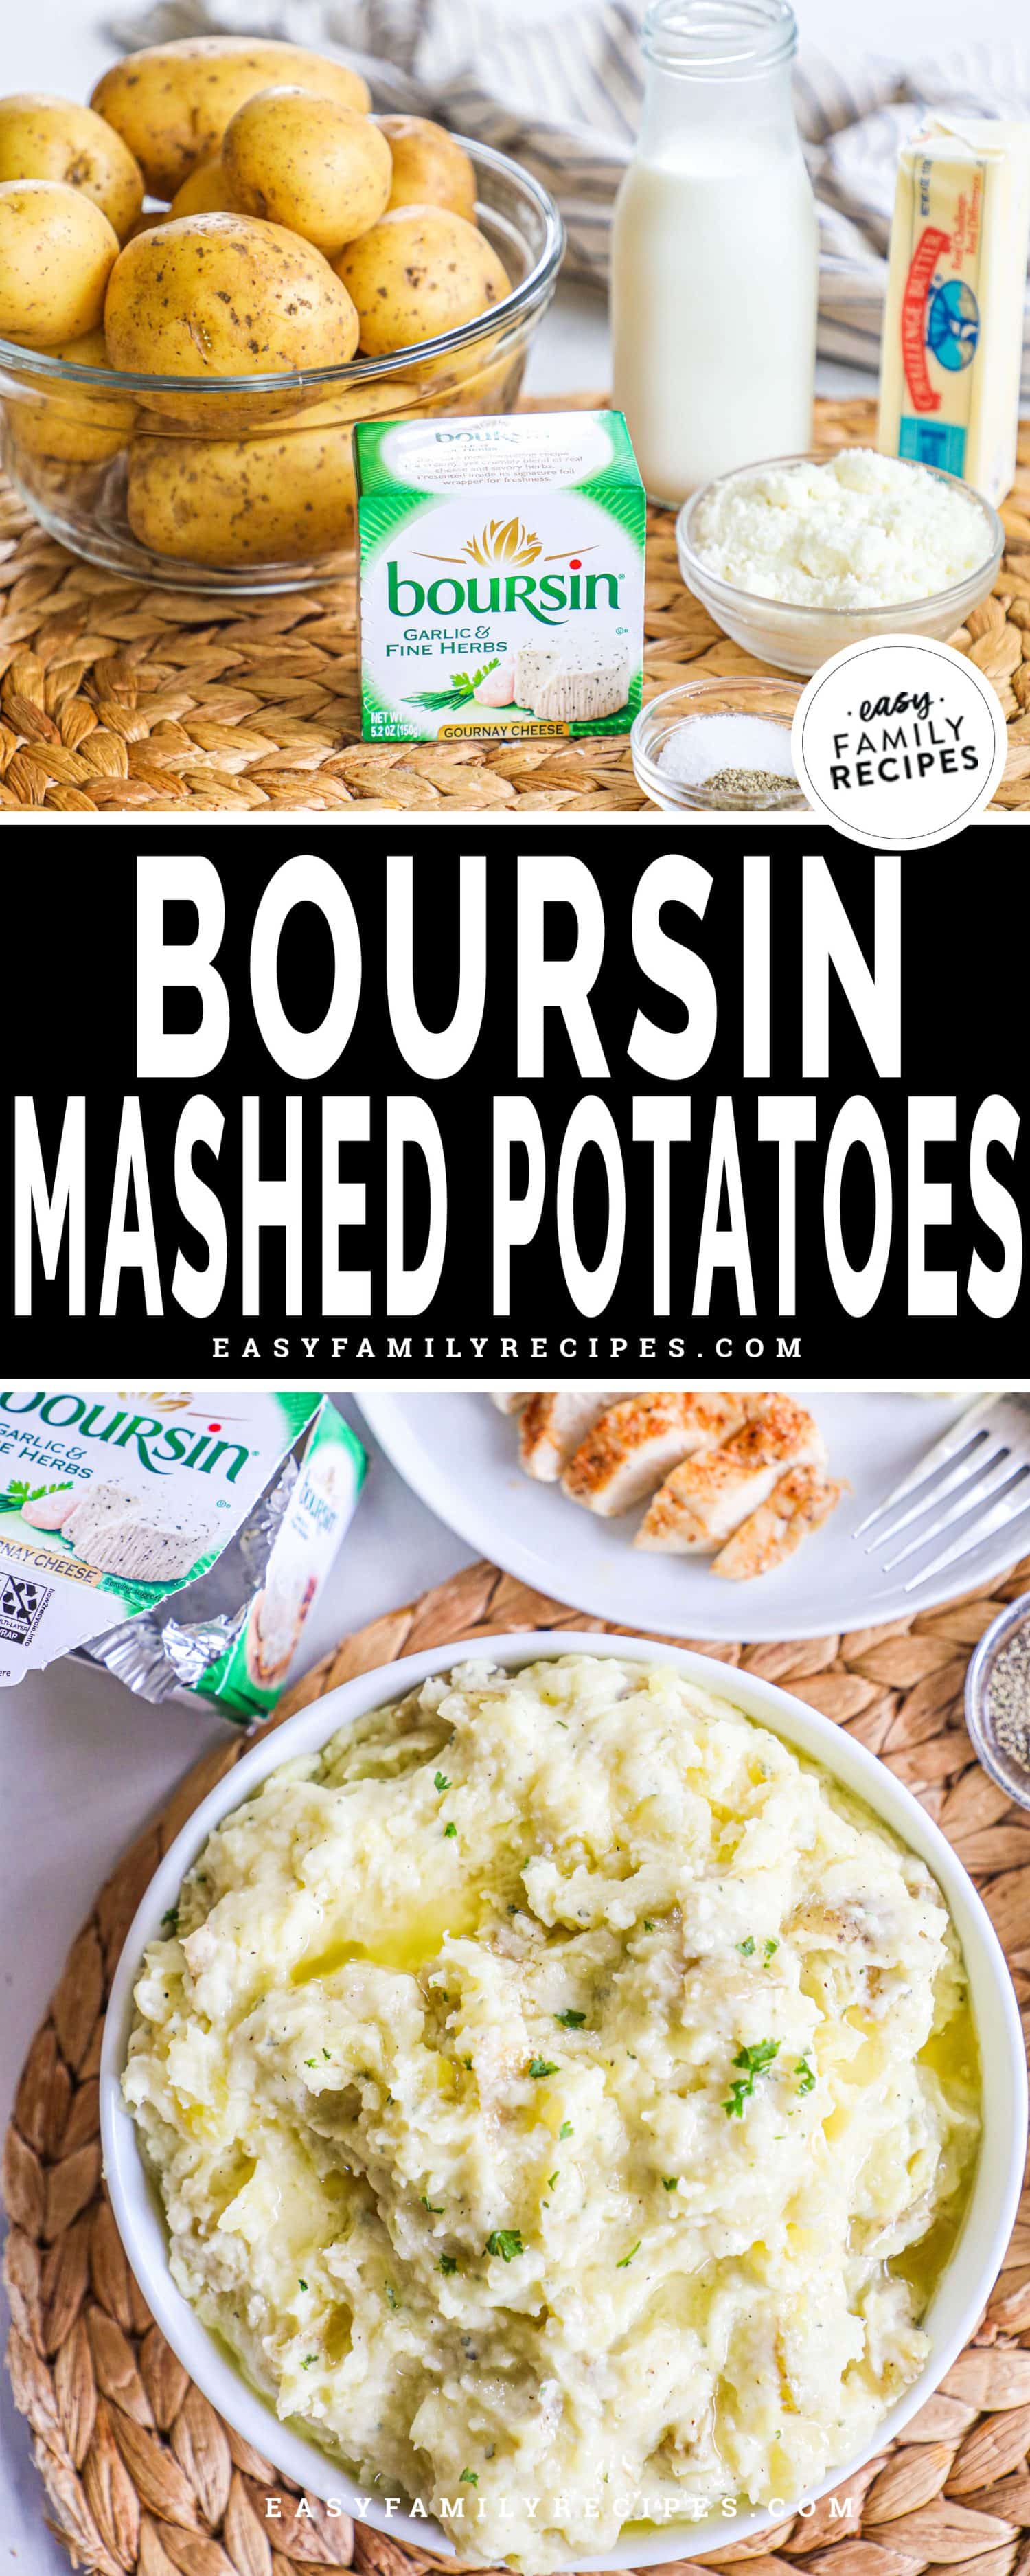 ingredients for boursin mashed potatoes and an overhead shot of a bowl of mashed potatoes.